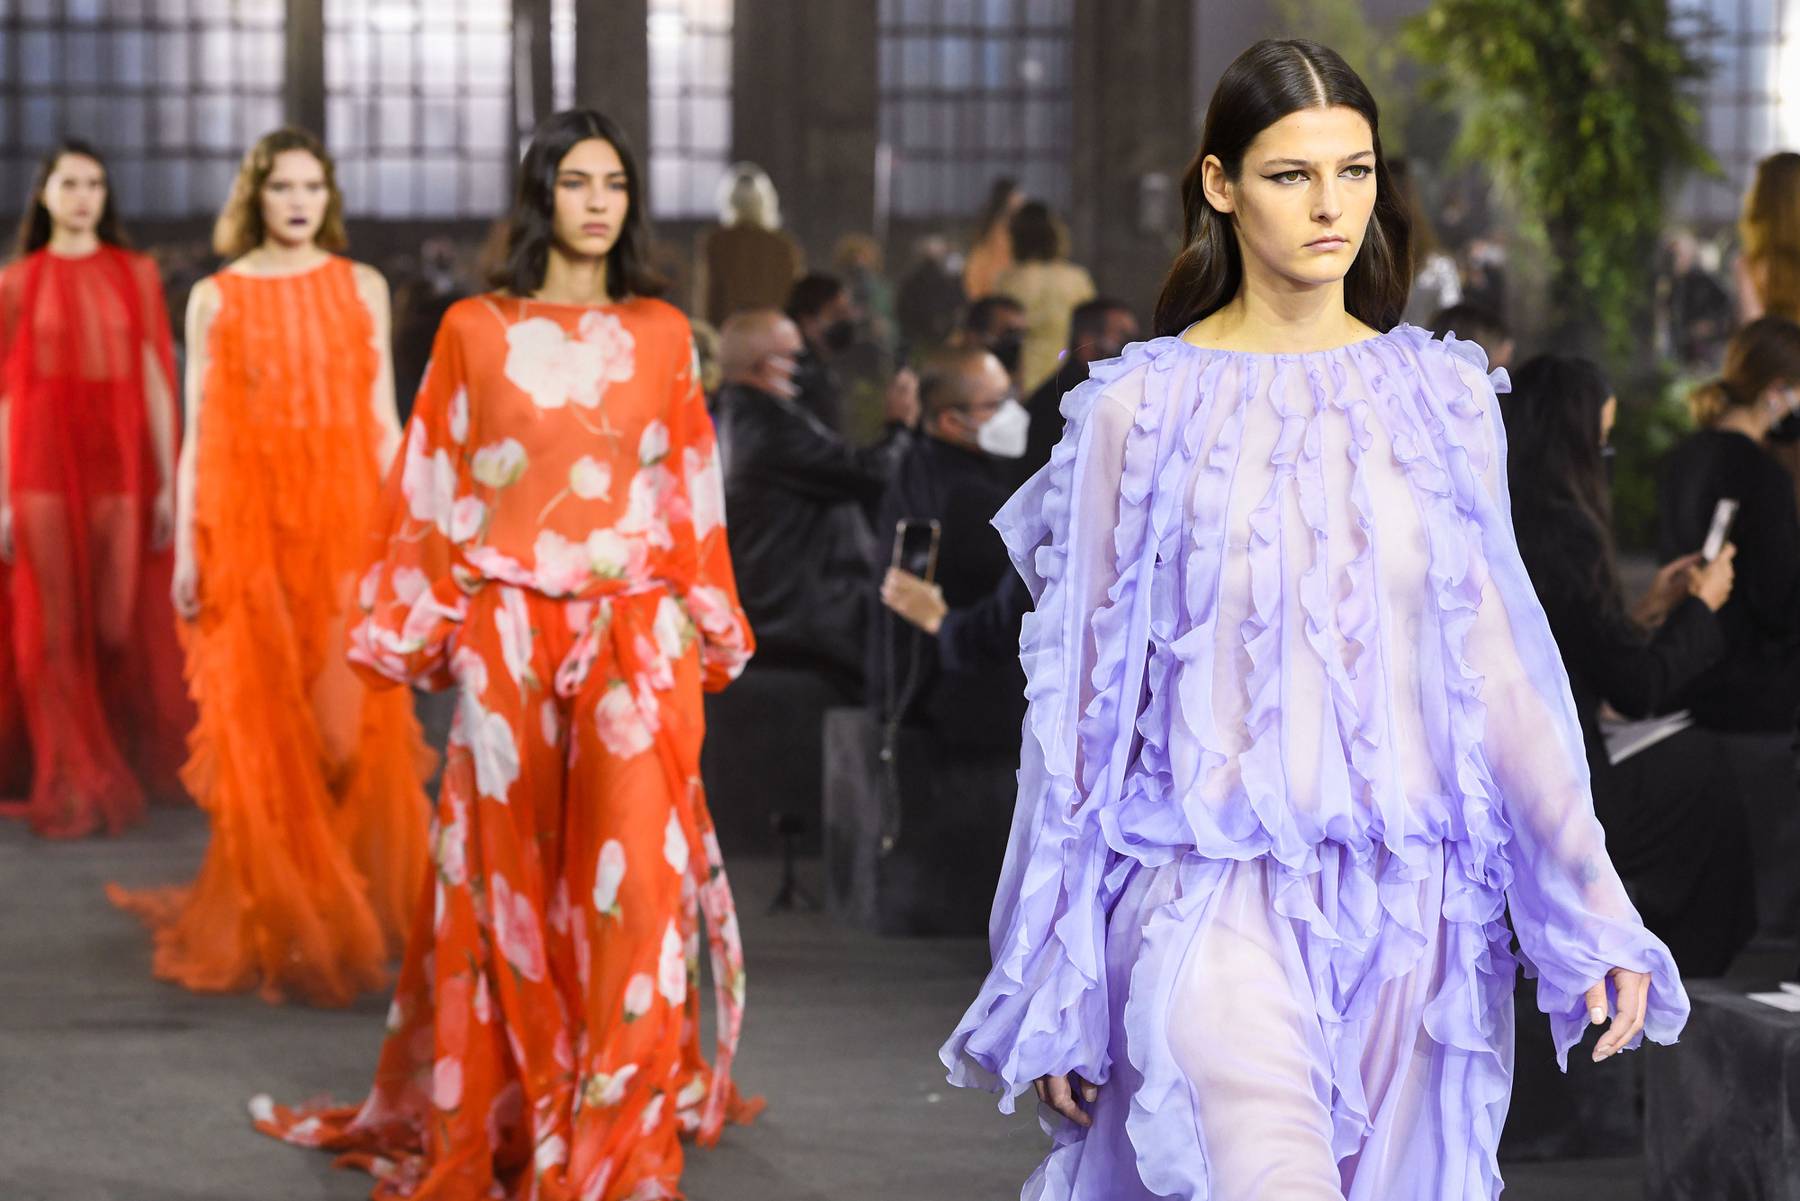 Valentino has been showing in Milan rather than Paris since the pandemic. Models walk the runway in looks from Pierpaolo Piccioli's Spring 2021 collection. Courtesy.